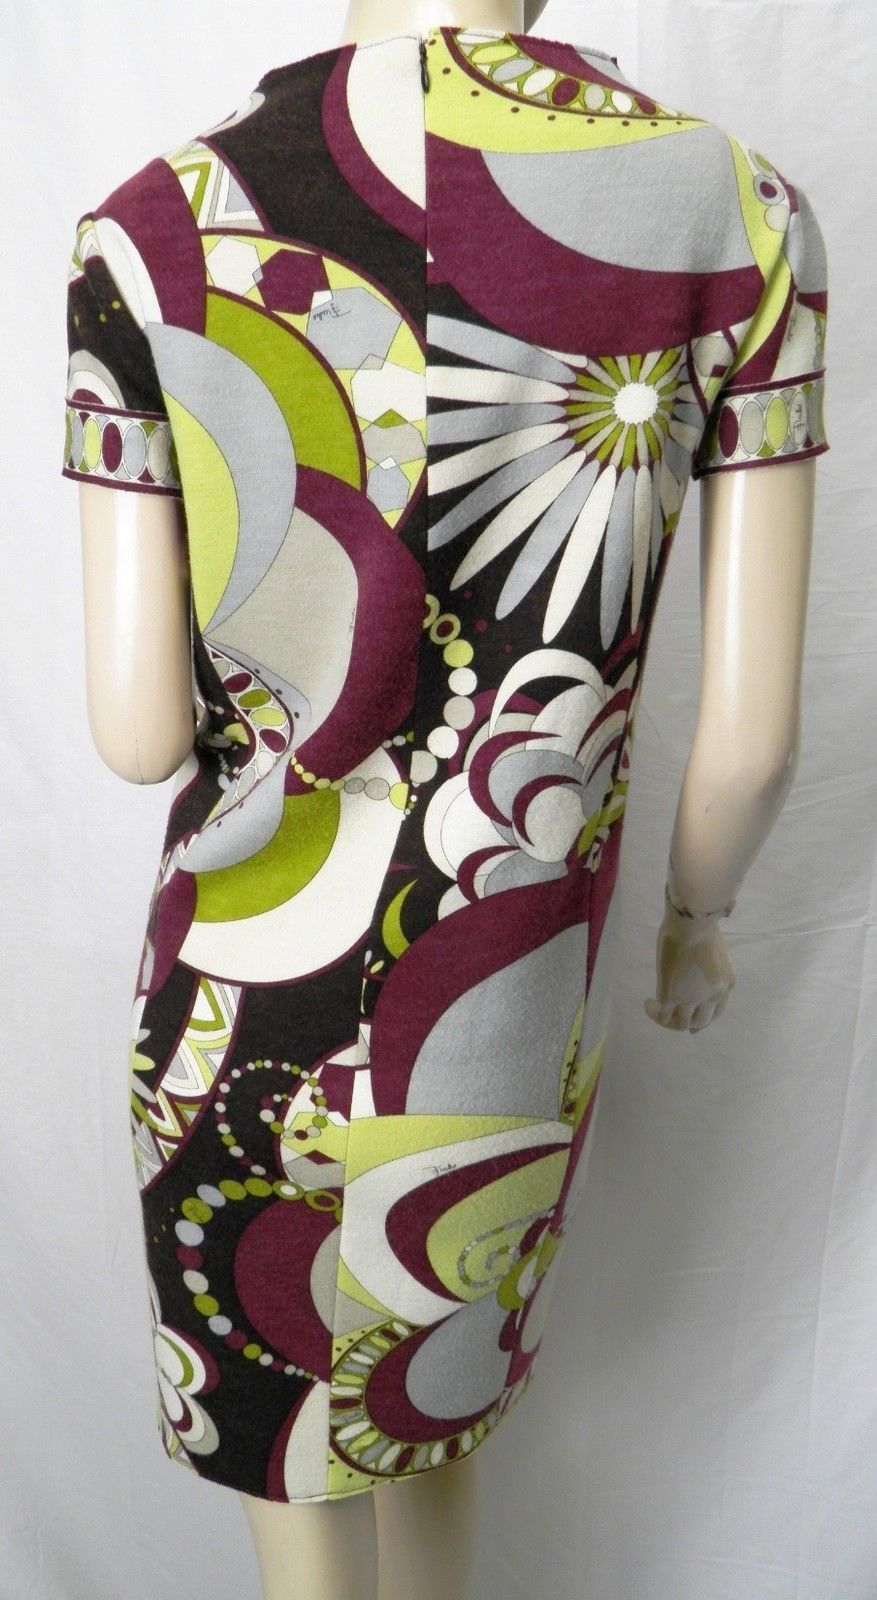 Women's 1990s Emilio Pucci Haute Couture Wool Silk Mod Dress with Belt Detail For Sale